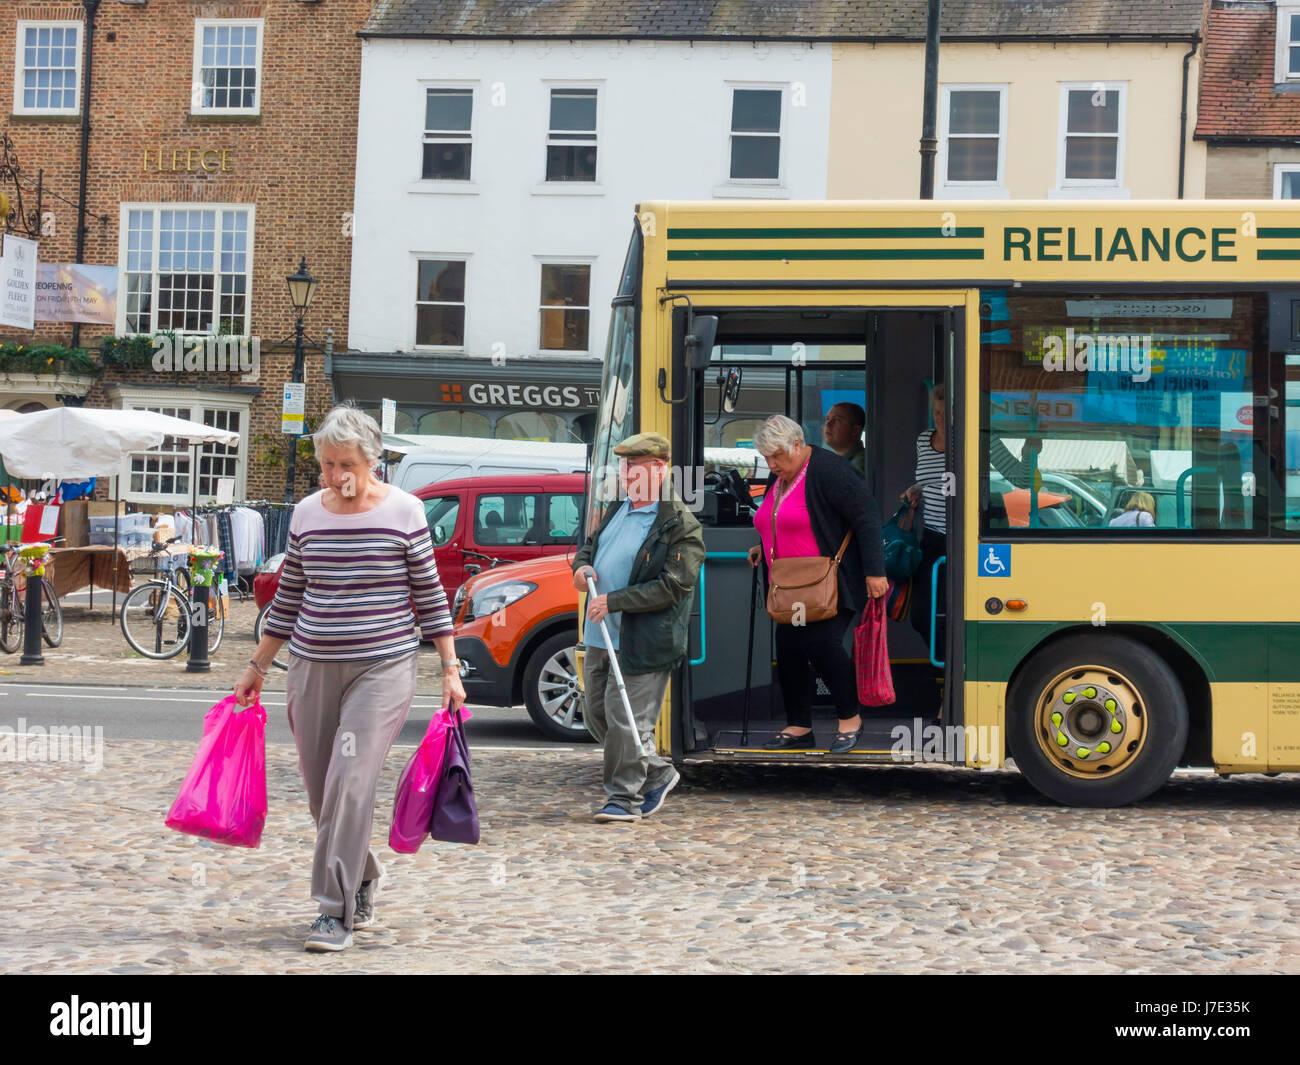 Passengers alighting from a Reliance bus in the Market Square of Thirsk, North Yorkshire England UK Stock Photo